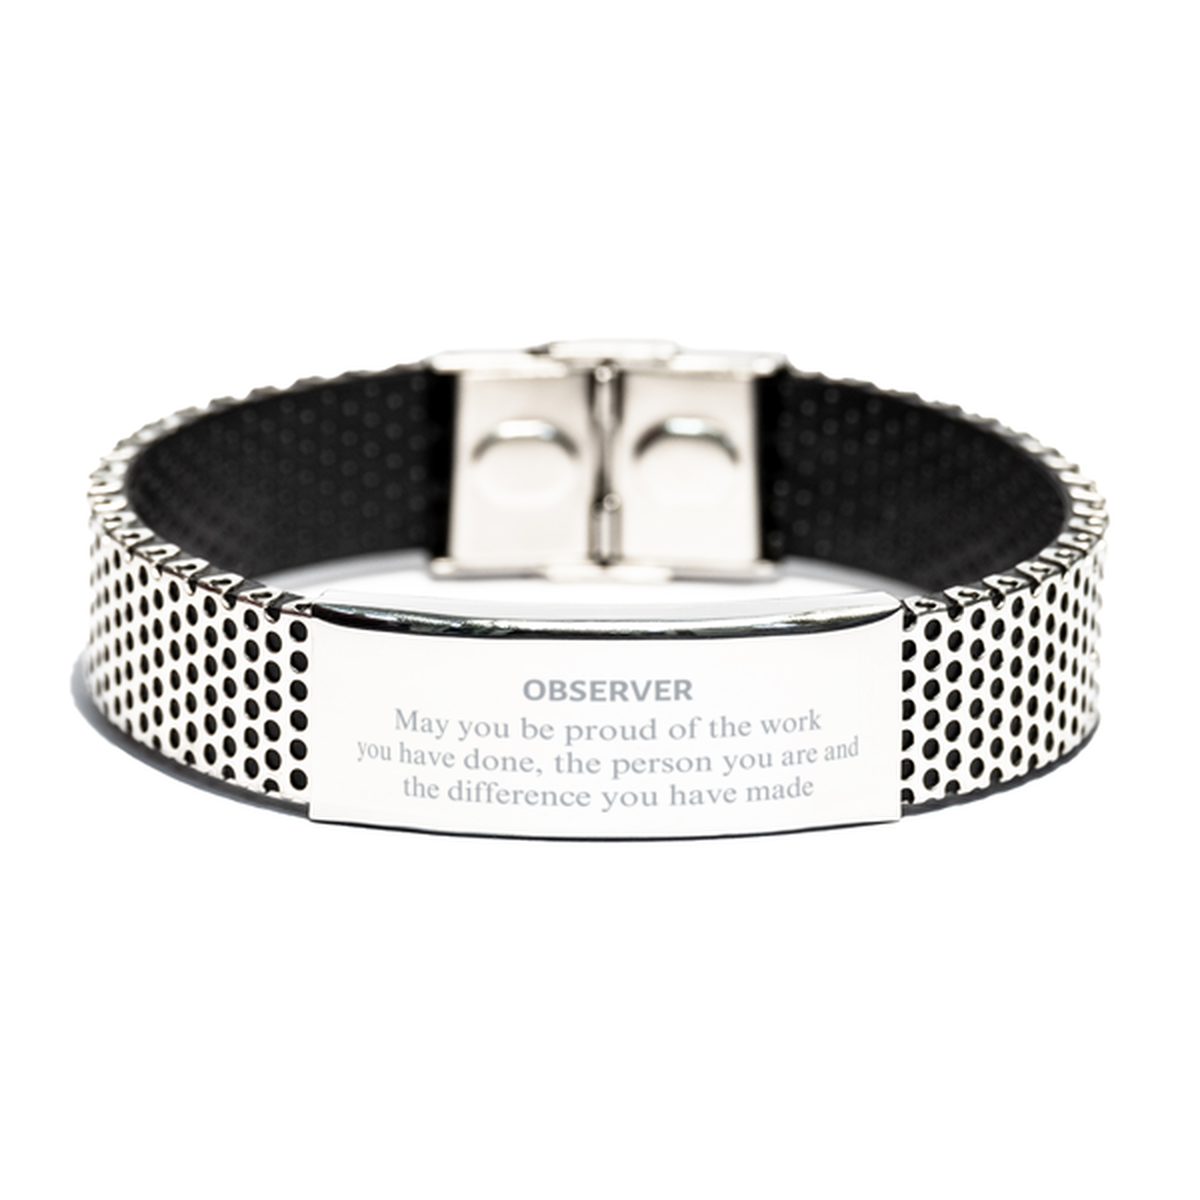 Observer May you be proud of the work you have done, Retirement Observer Stainless Steel Bracelet for Colleague Appreciation Gifts Amazing for Observer